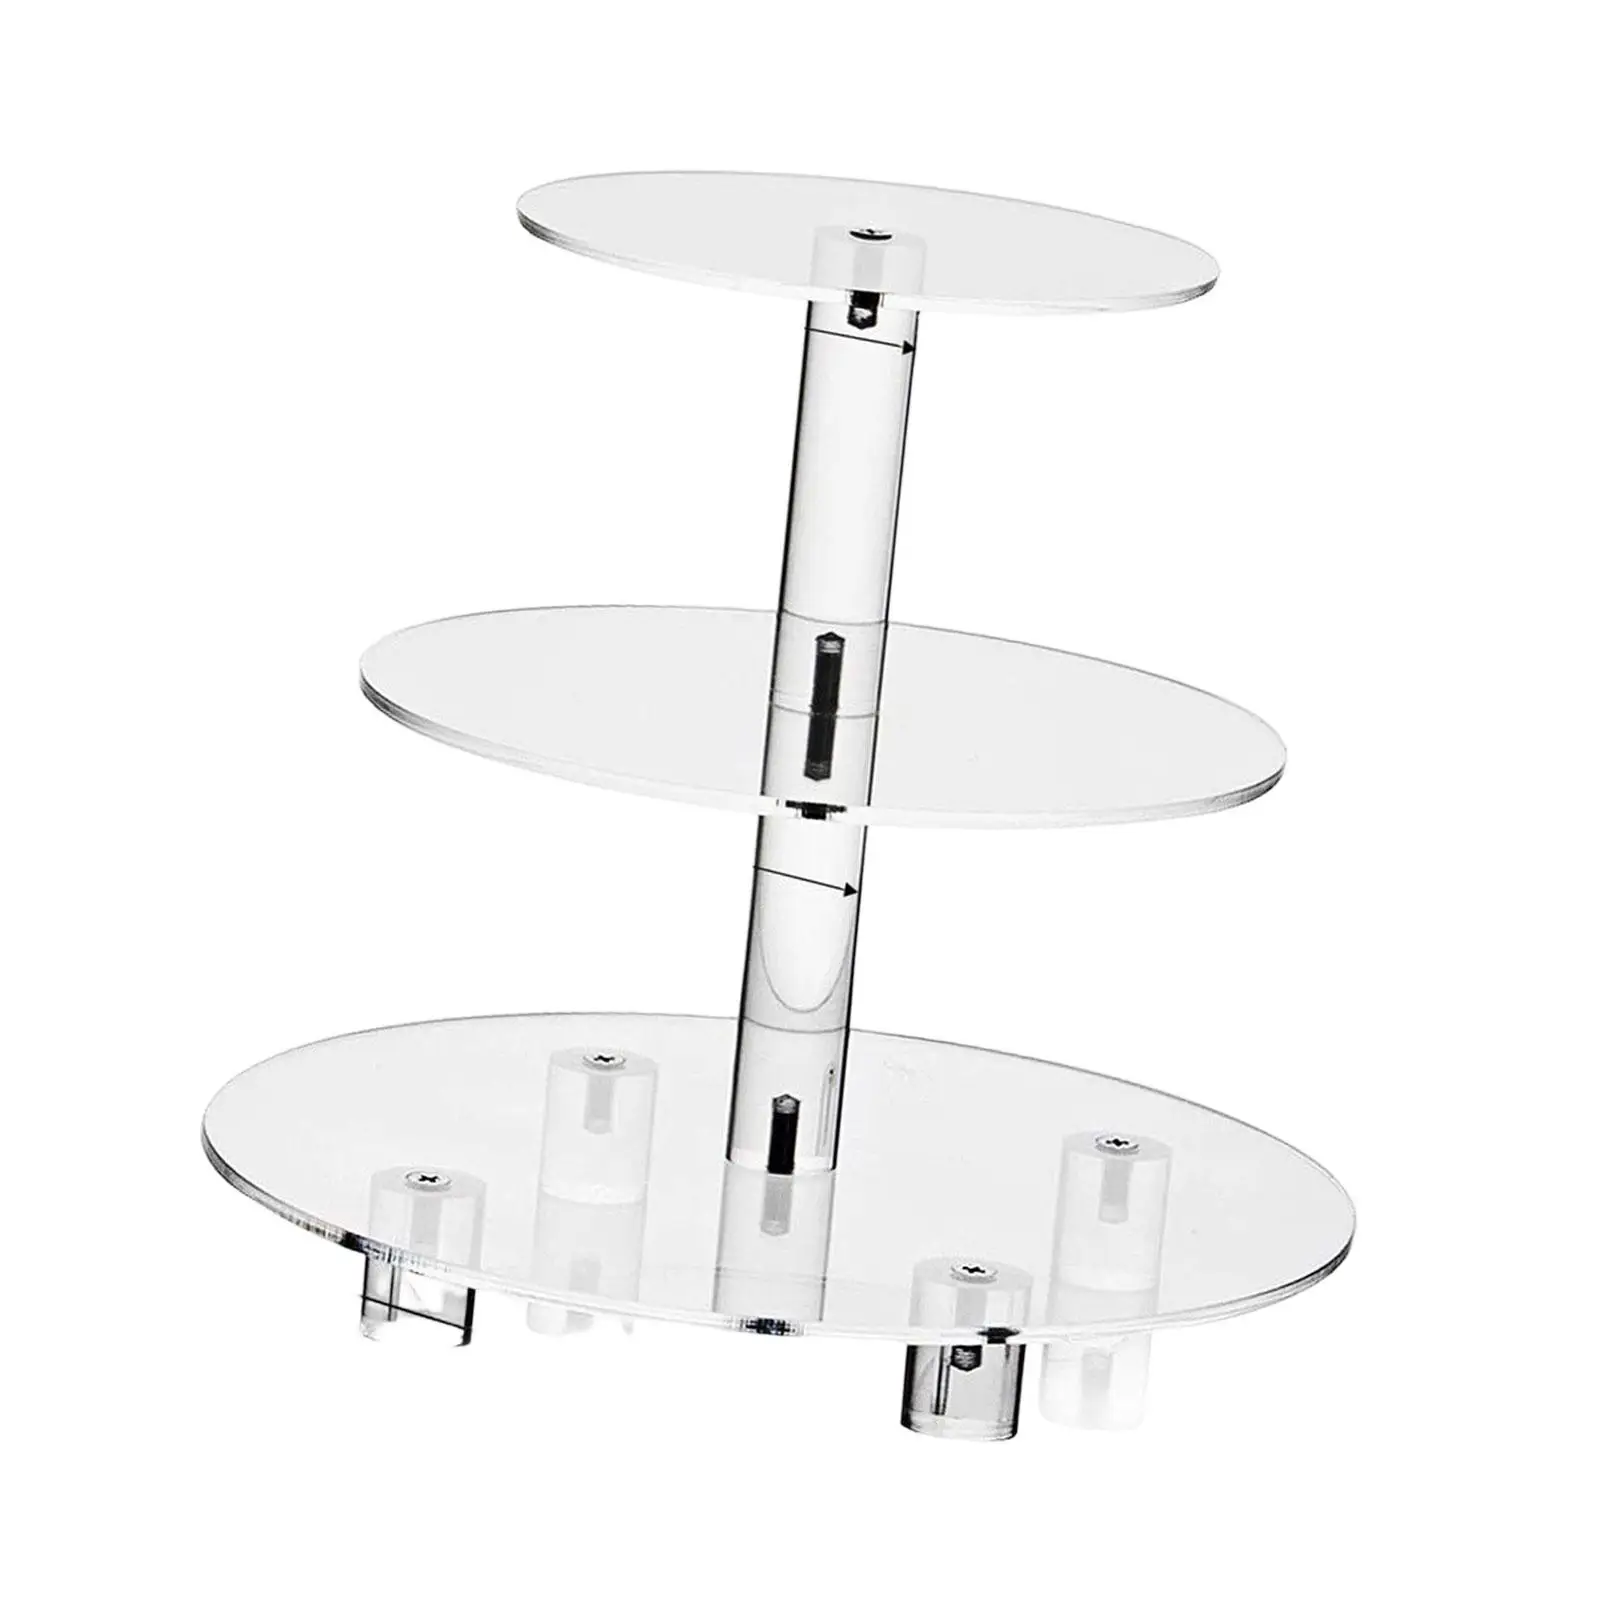 Acrylic Cake Stand Display Stand Detachable Cupcake Stand for Baby Showers